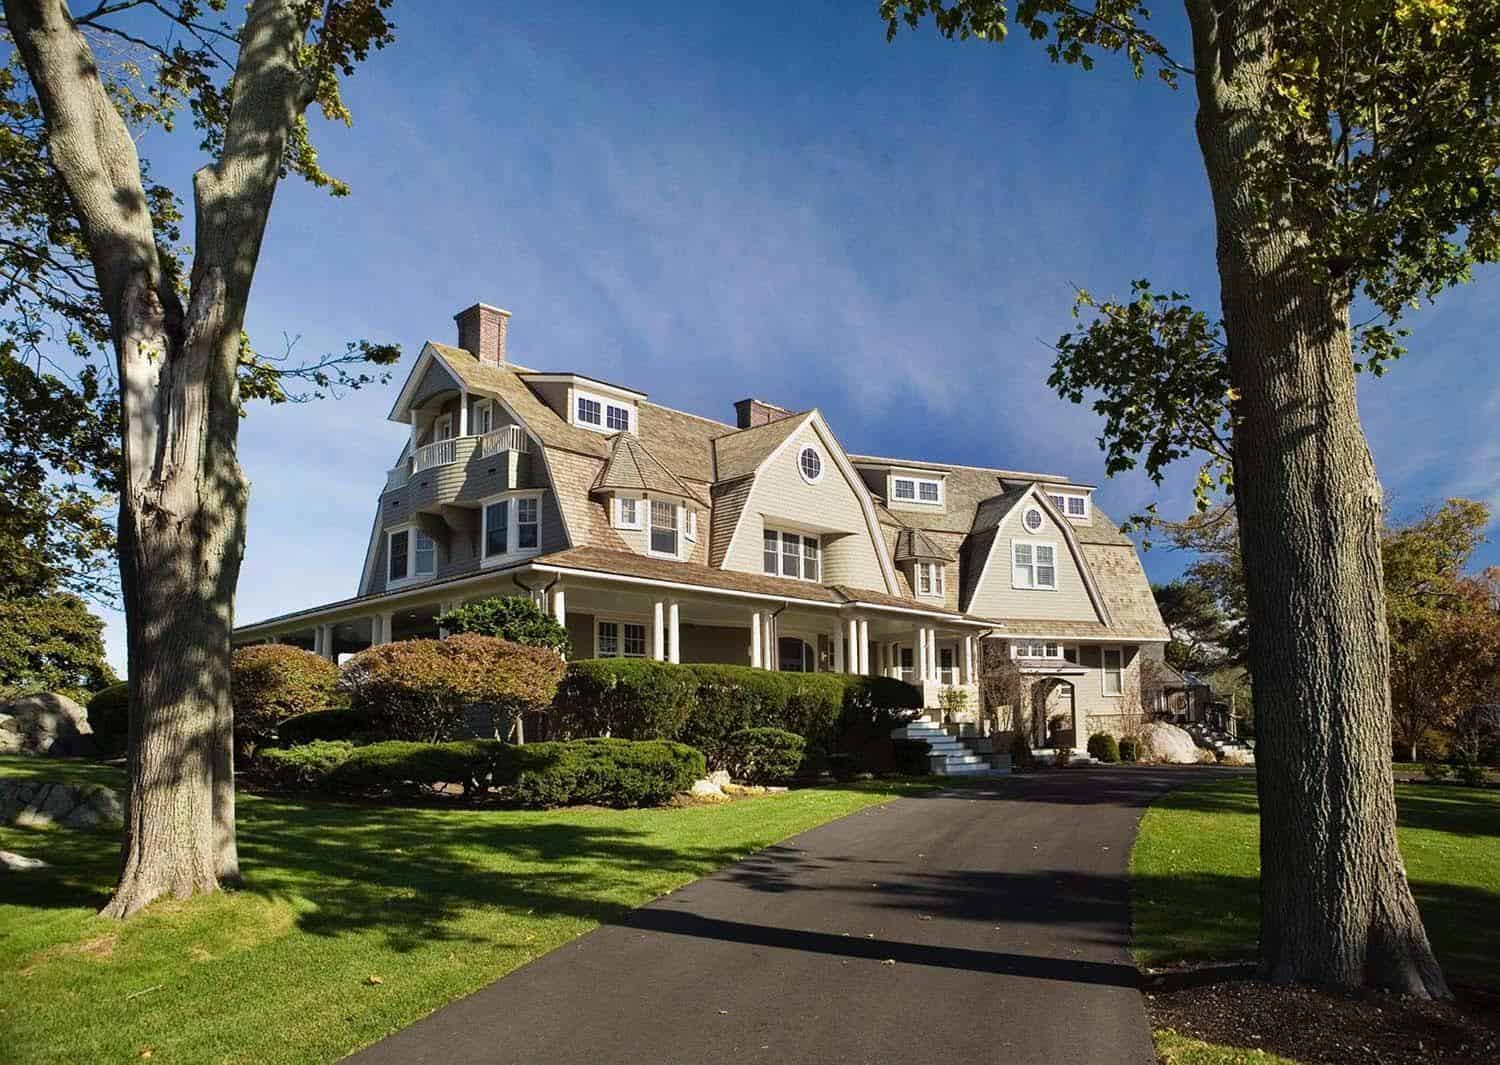 Charming New England Coastal Home With Amazing Details Architecture And Design